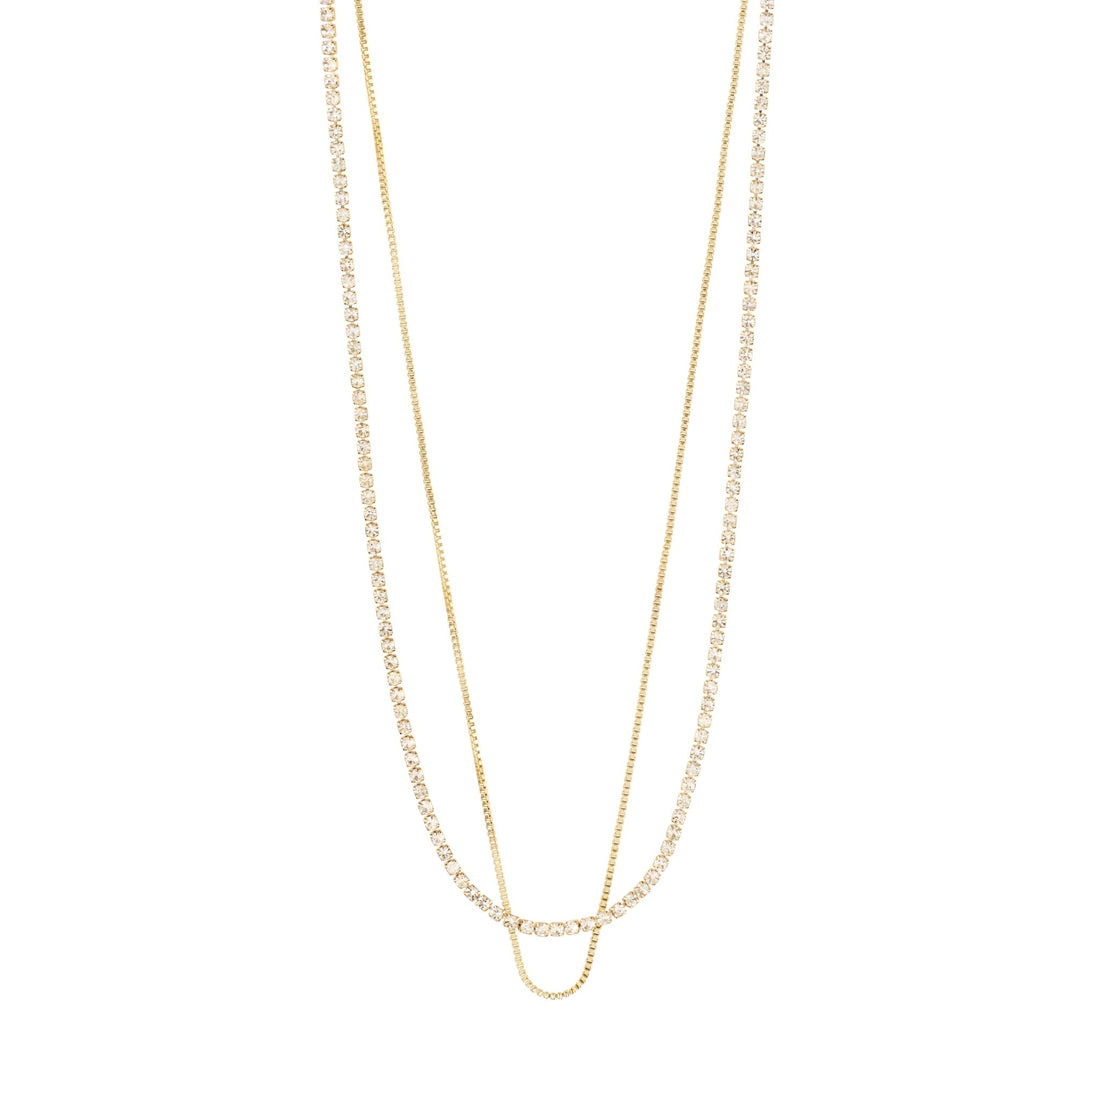 Mille Crystal Layered Necklace - PILGRIM